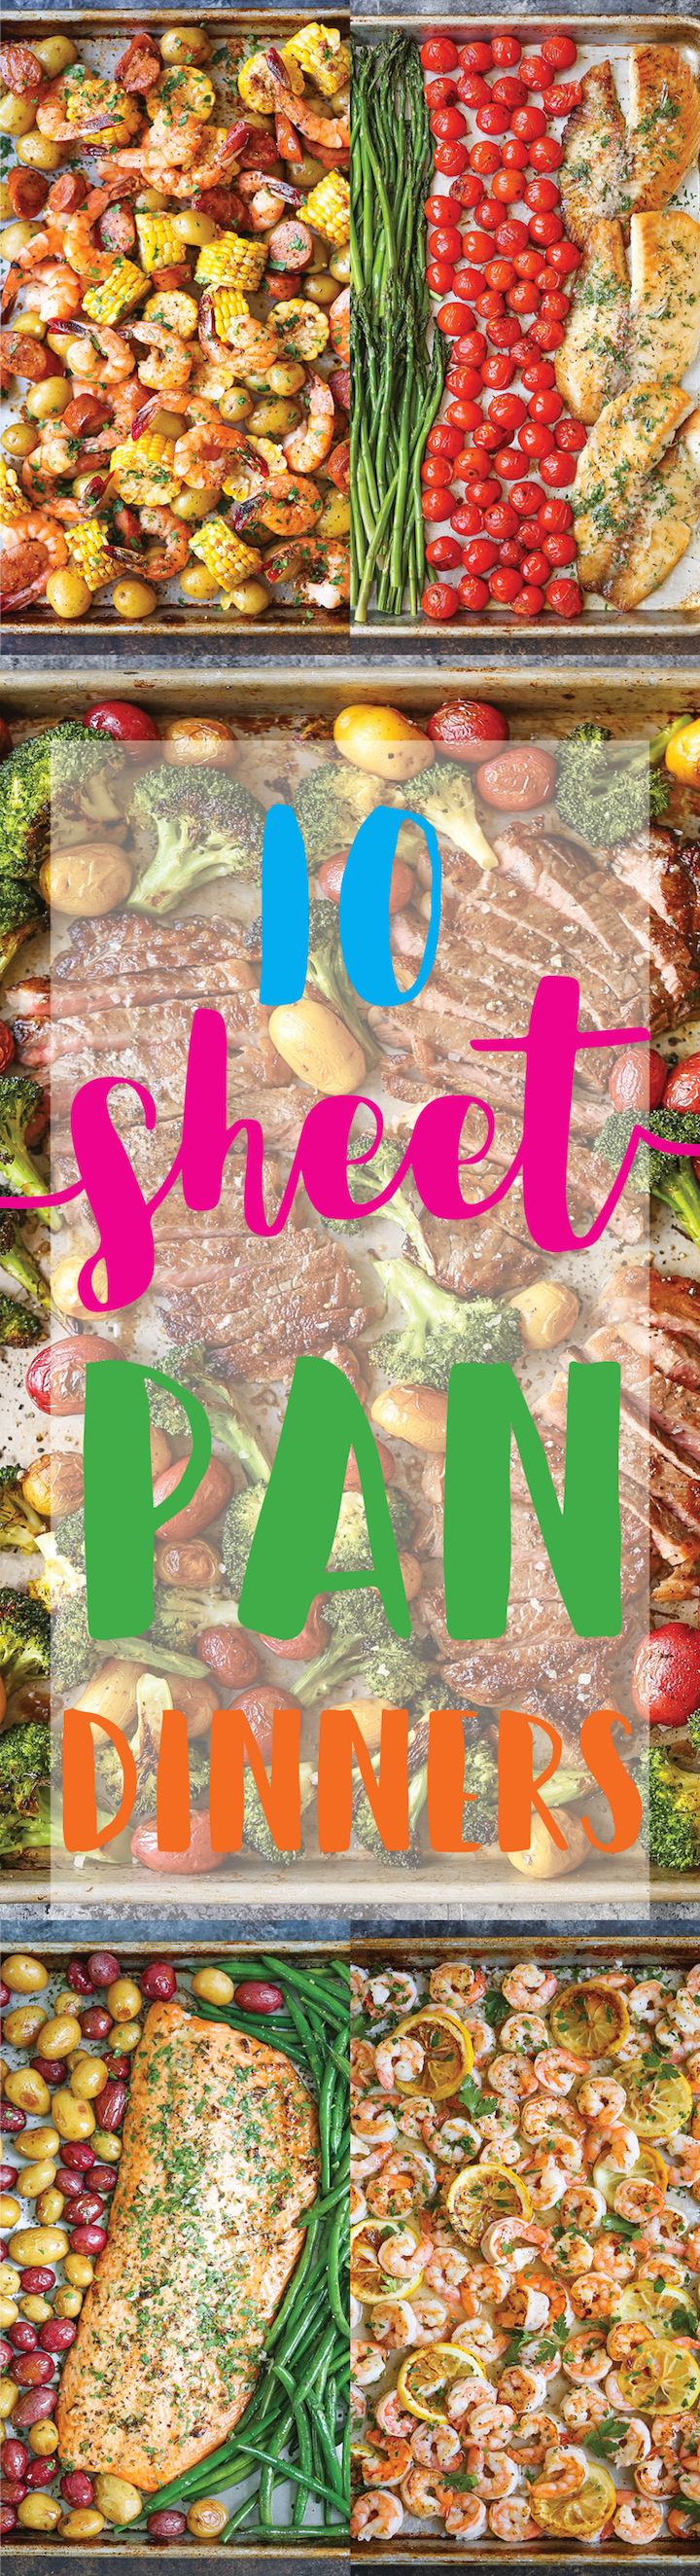 10 Sheet Pan Dinners - Speedy, family-friendly, no-brainer dinners you need to make tonight! These dinners are so easy to make and clean up is a breeze!